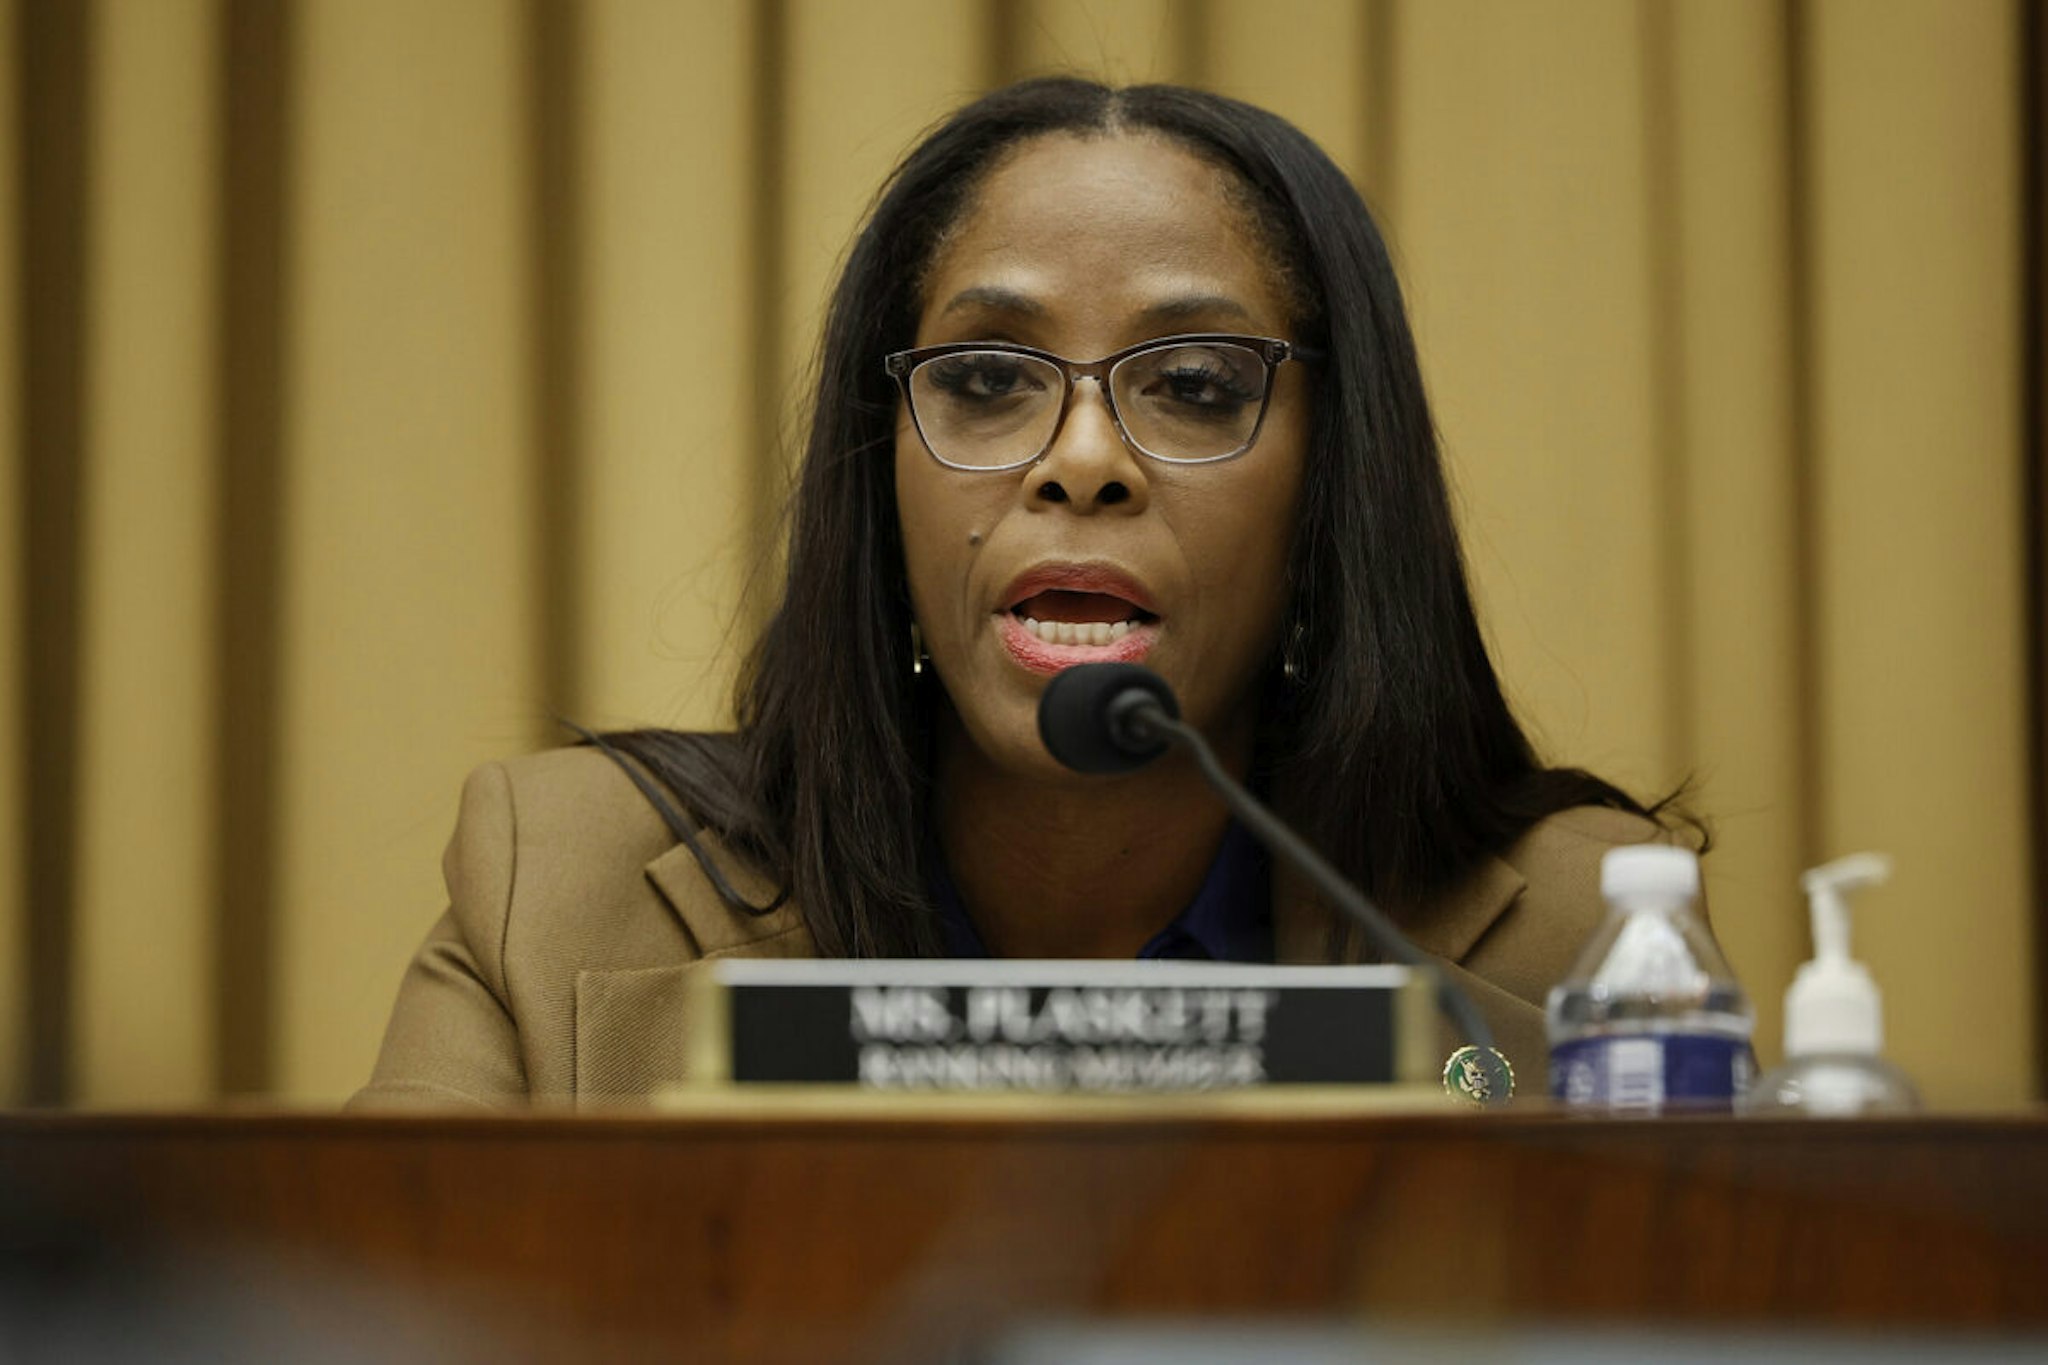 WASHINGTON, DC - FEBRUARY 09: Ranking member Del. Stacey Plaskett (D-VI) delivers opening remarks during the first hearing of the Weaponization of the Federal Government subcommittee in the Rayburn House Office Building on Capitol Hill on February 09, 2023 in Washington, DC. This was the first hearing of the new subcommittee, created by a sharply divided Congress to scrutinize what Republican members have charged is an effort by the federal government to target and silence conservatives.